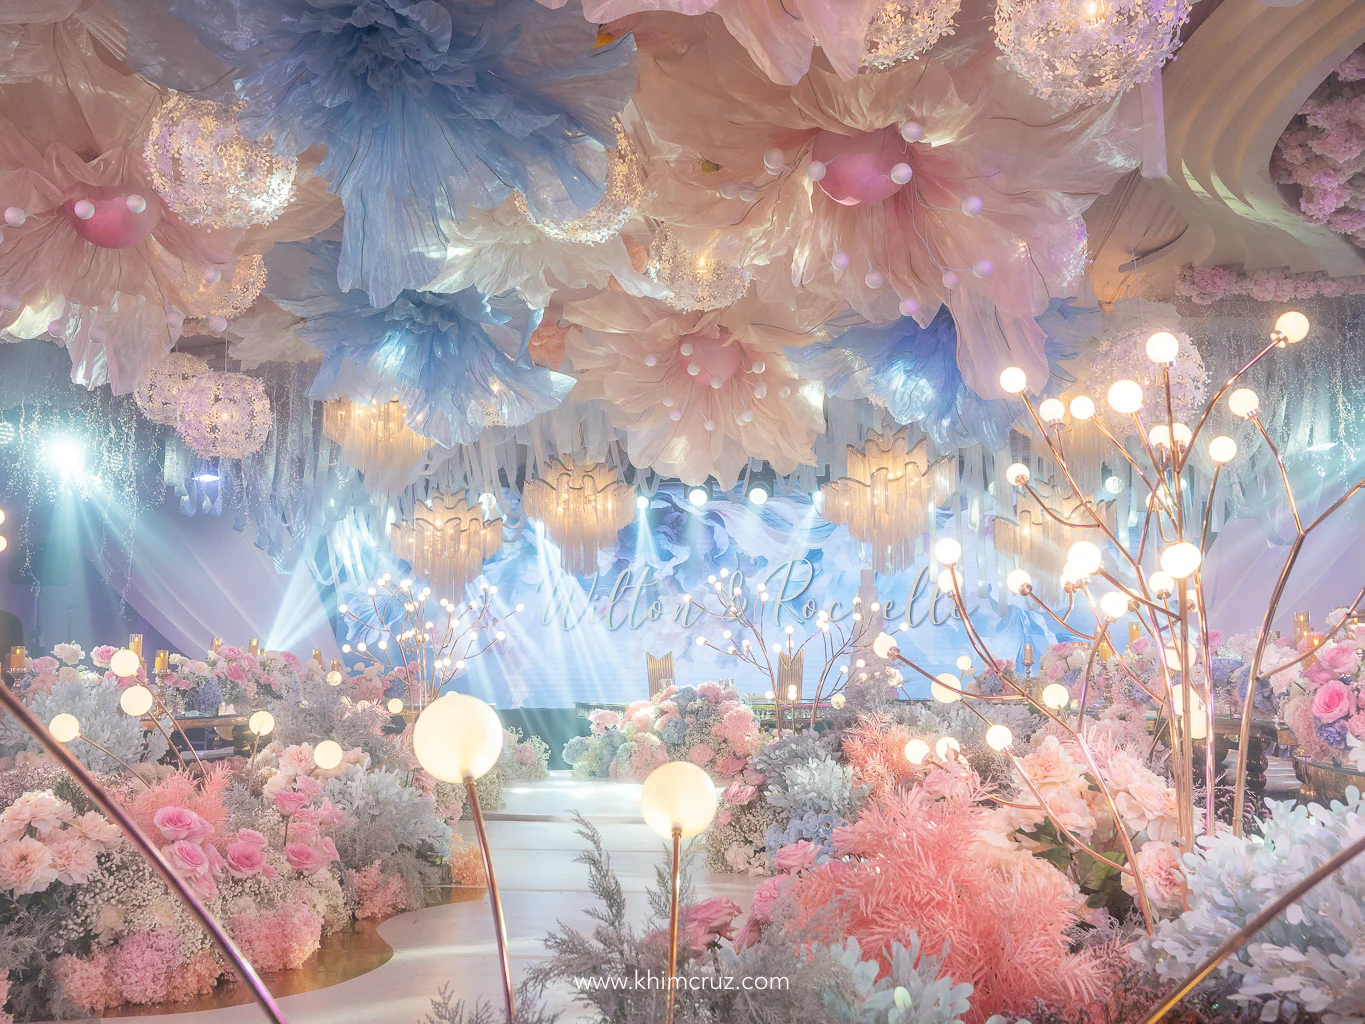 dreamy floral escape wedding hanging oversized floral designs and chandeliers